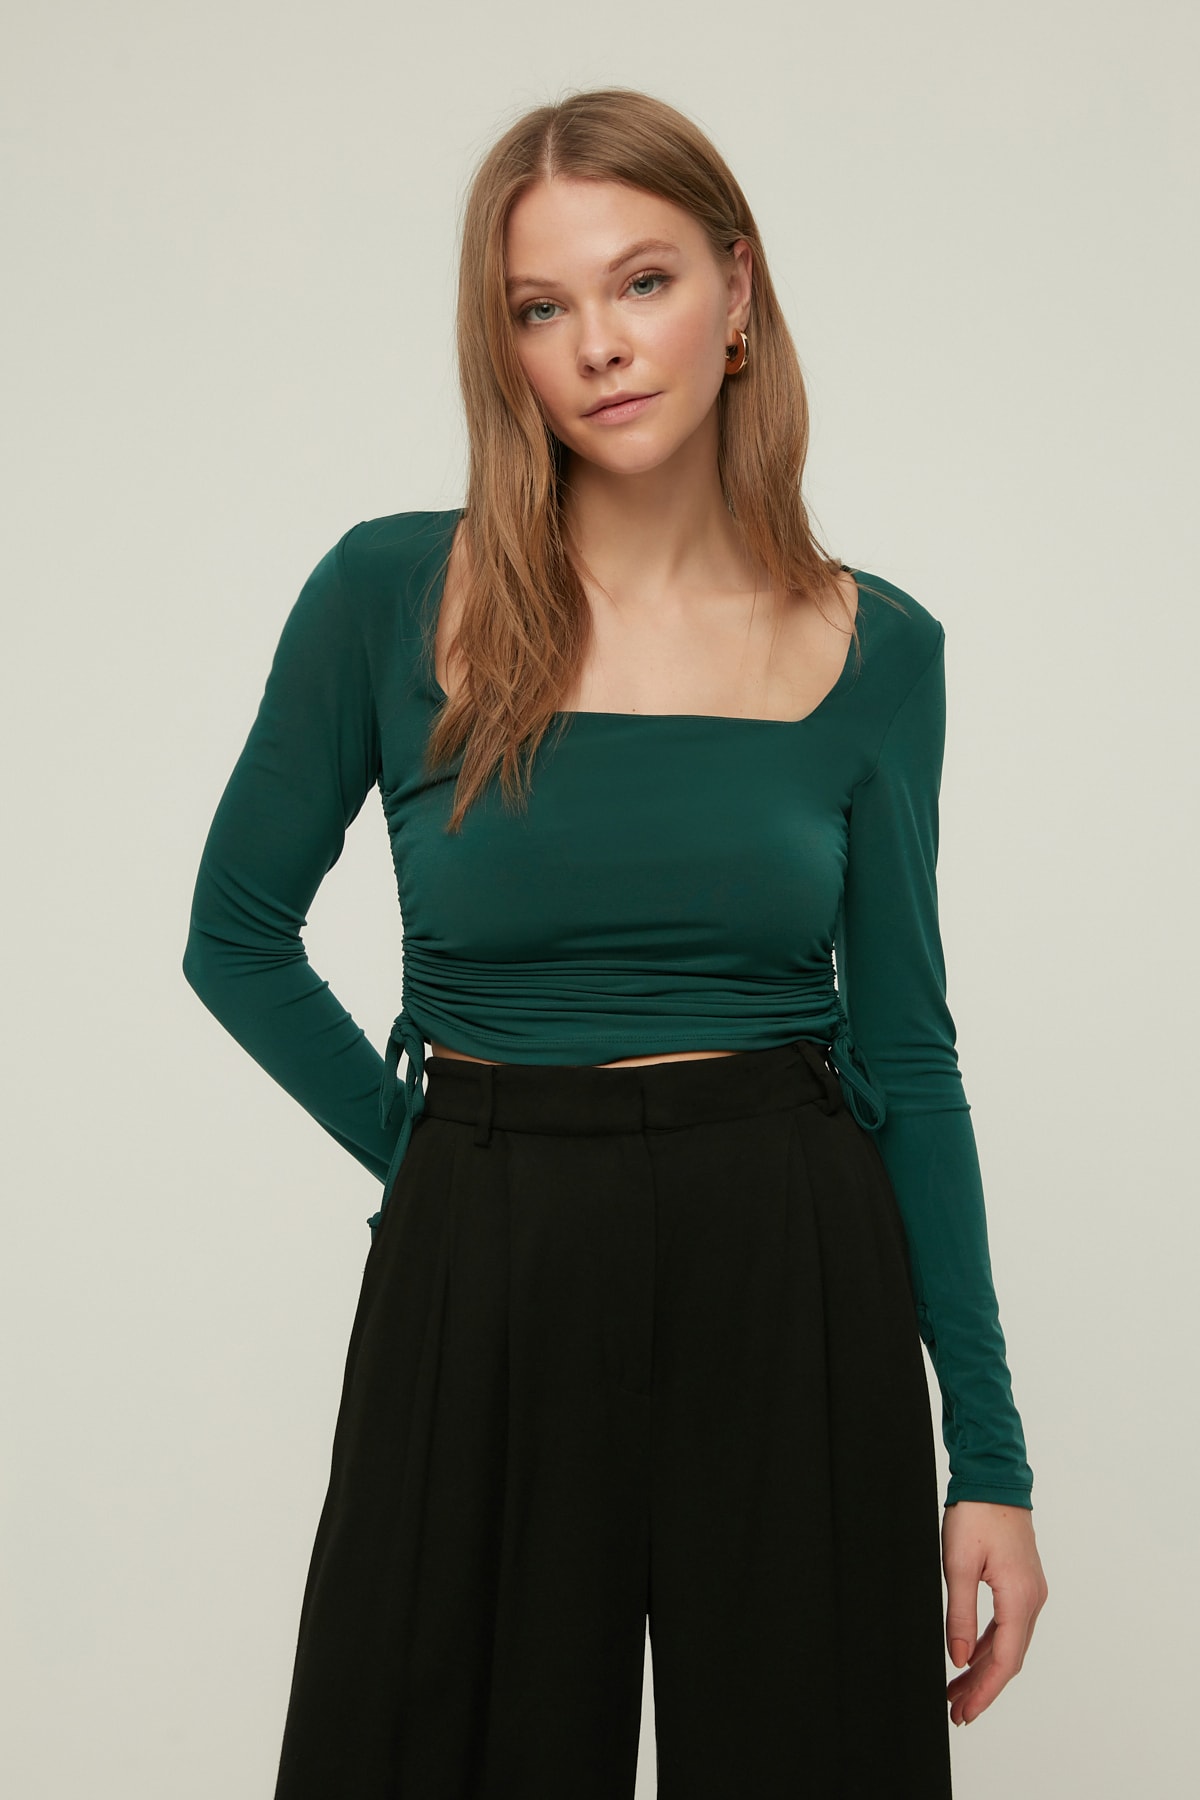 Trendyol Emerald Square Neckline Shirring Detail Fitted/Sleek Crop, Flexible Knitted Blouse